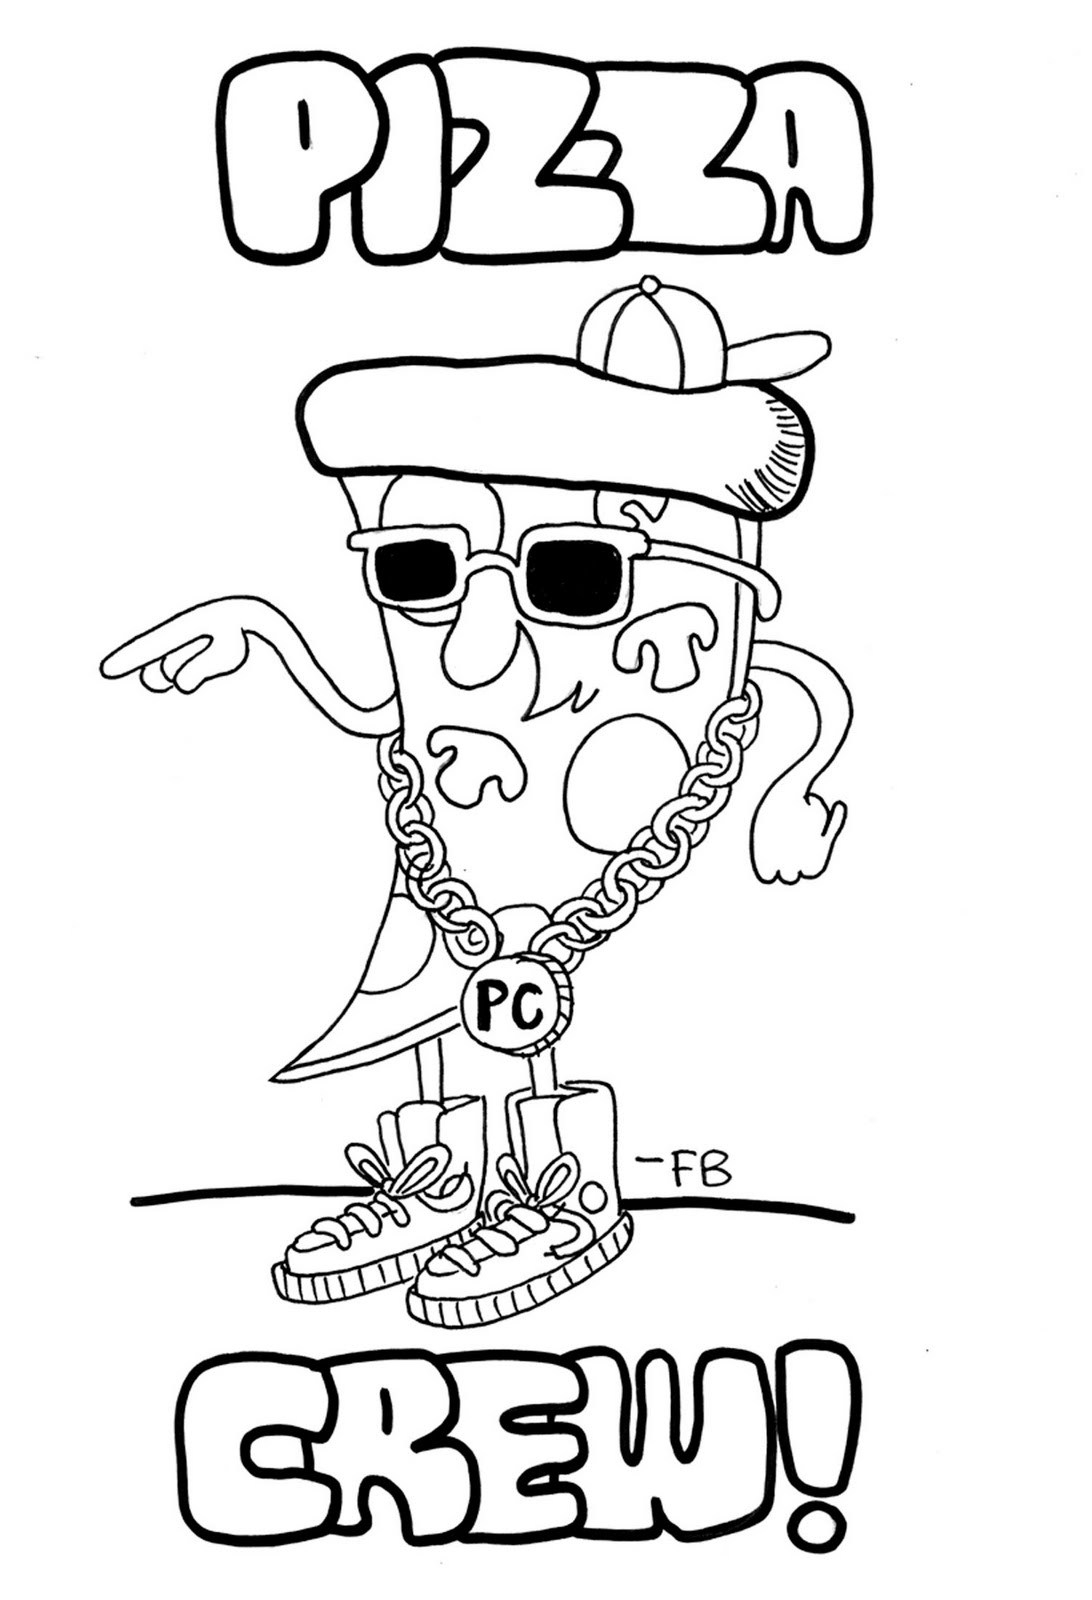 Cool Coloring Pages For 9 Year Olds Coloring Pages